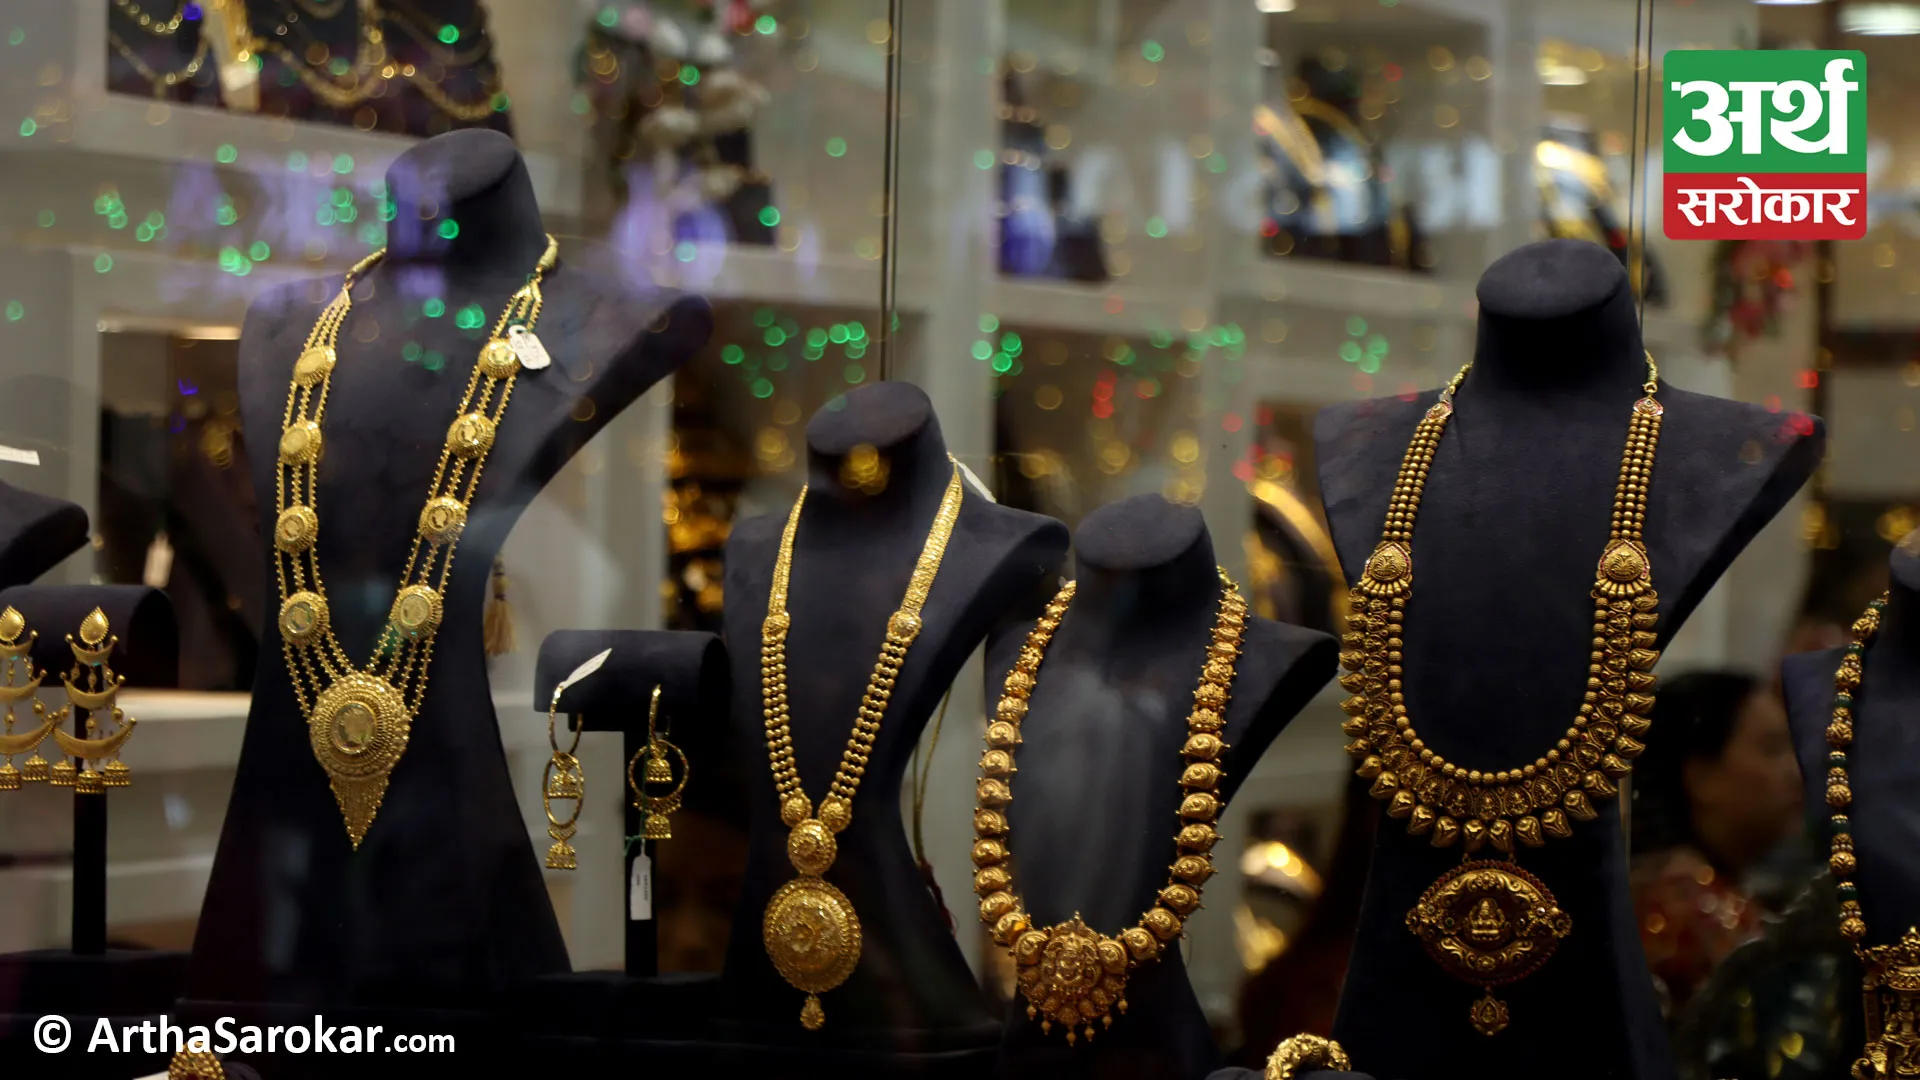 Price of gold increased by 400 rupees per tola on Sunday